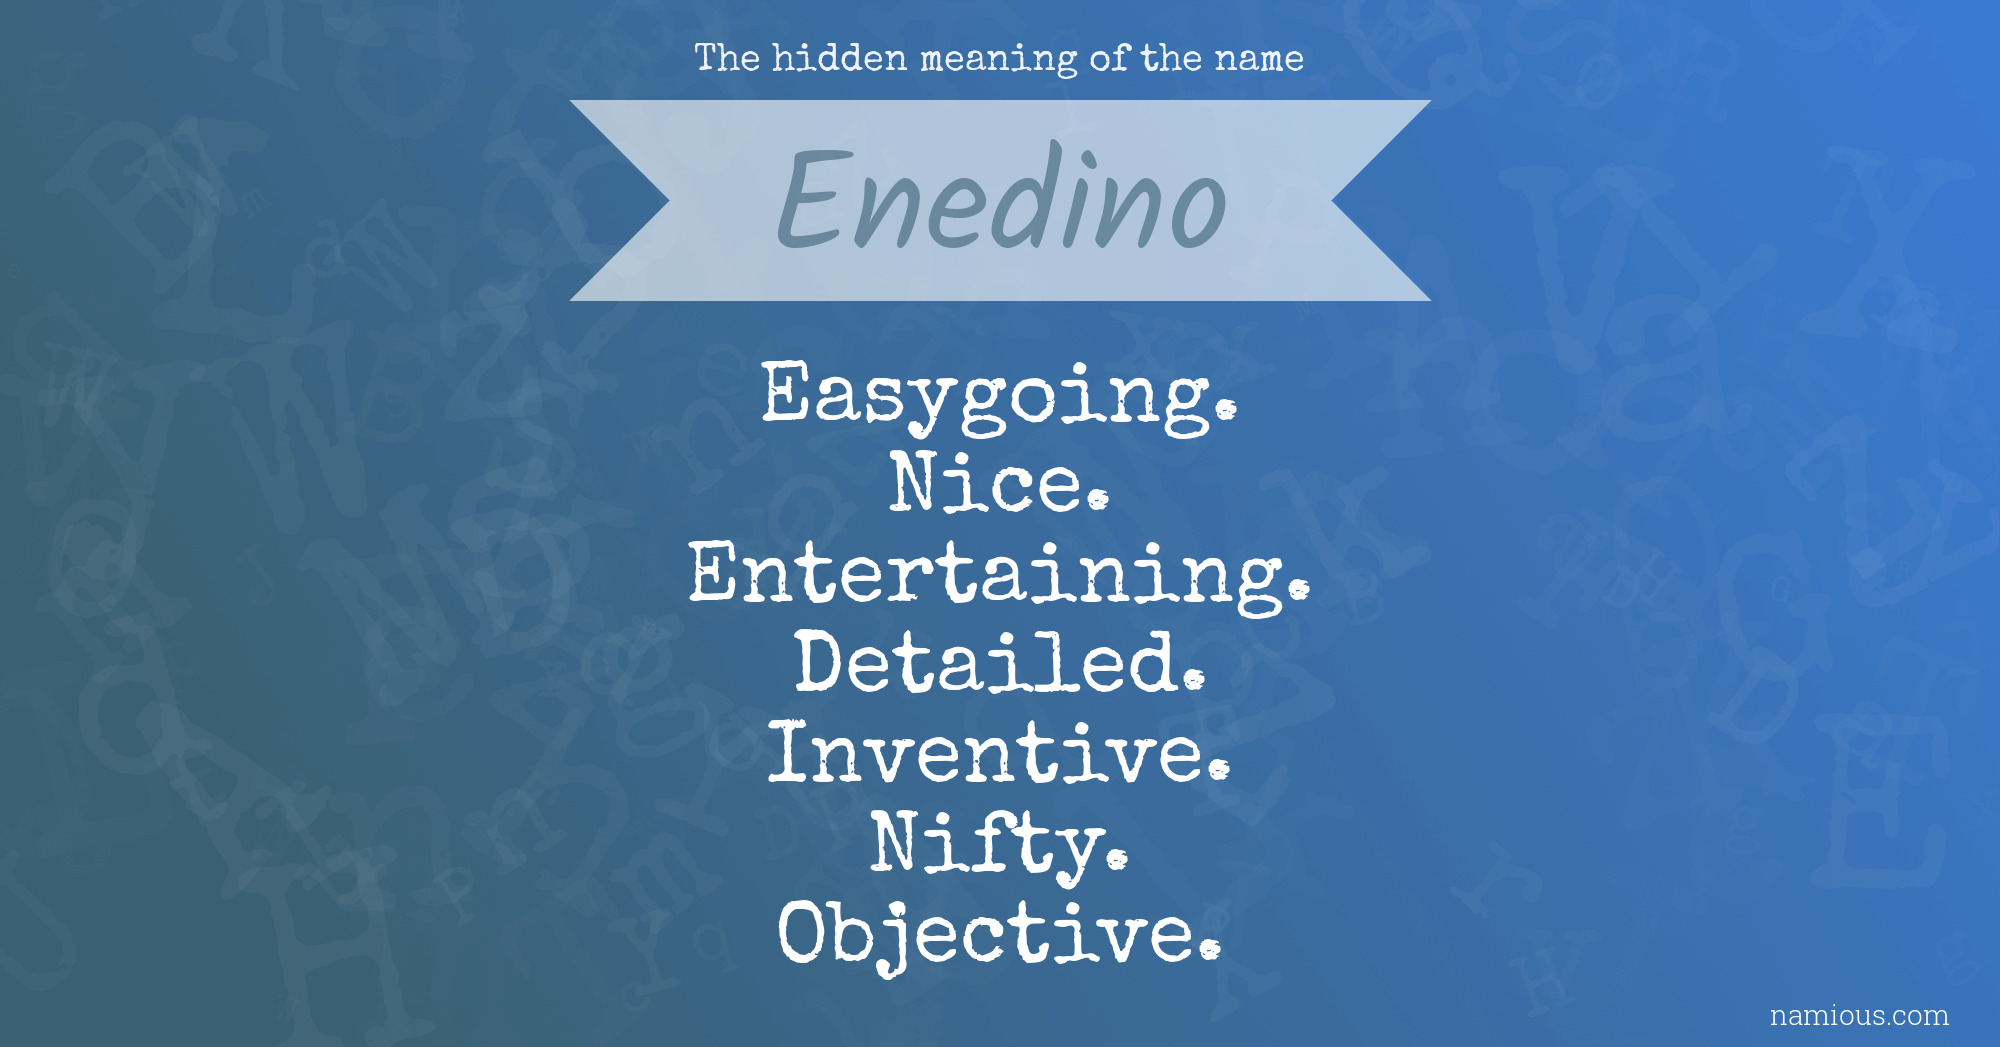 The hidden meaning of the name Enedino